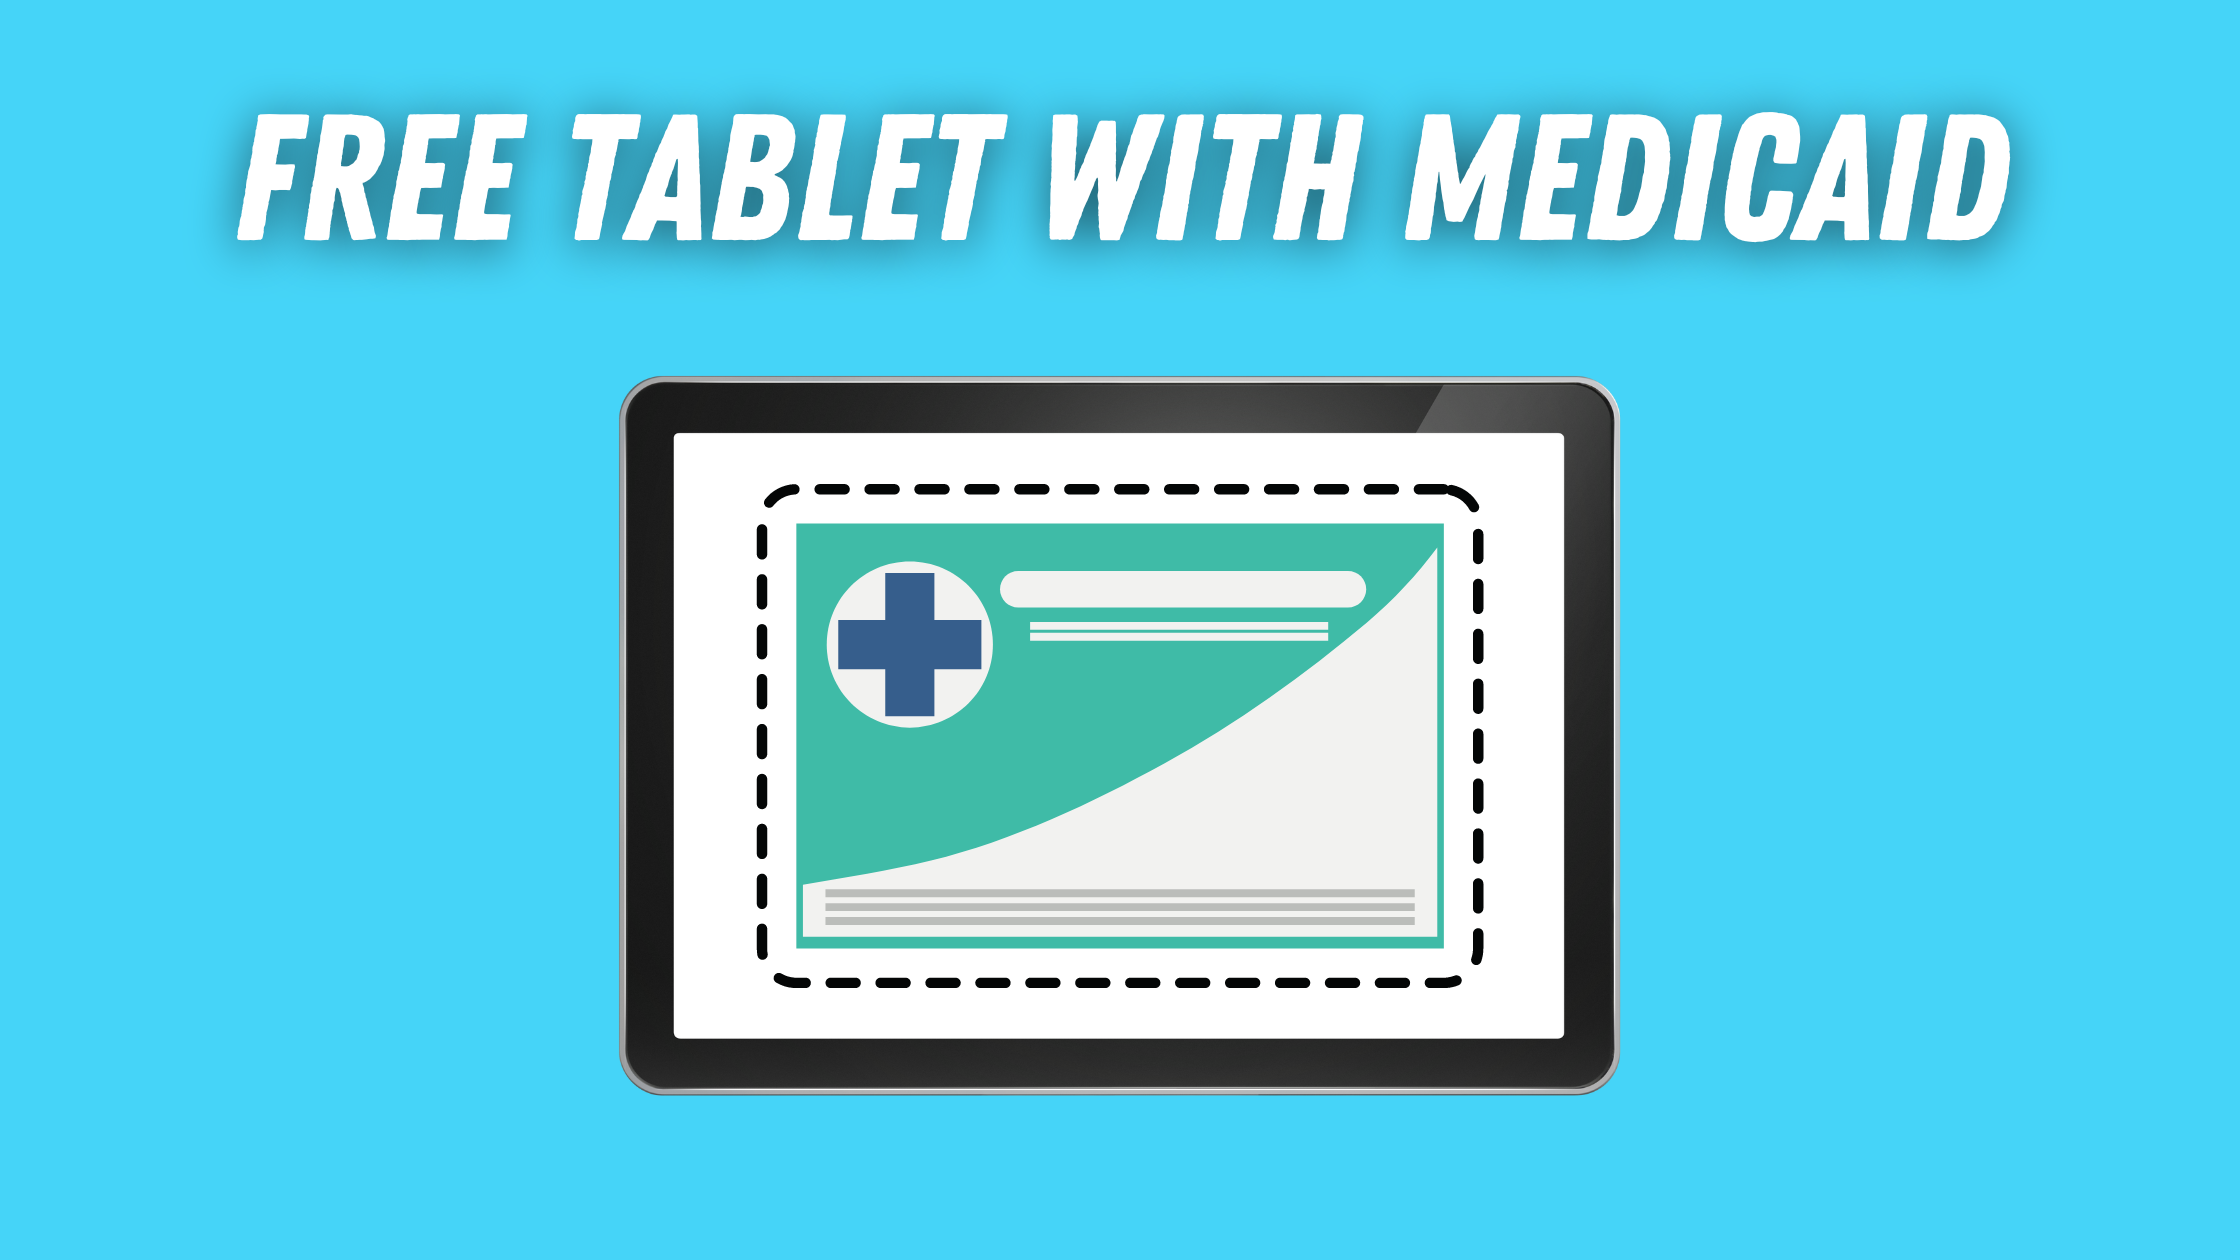 A free tablet provided to eligible Medicaid recipients.